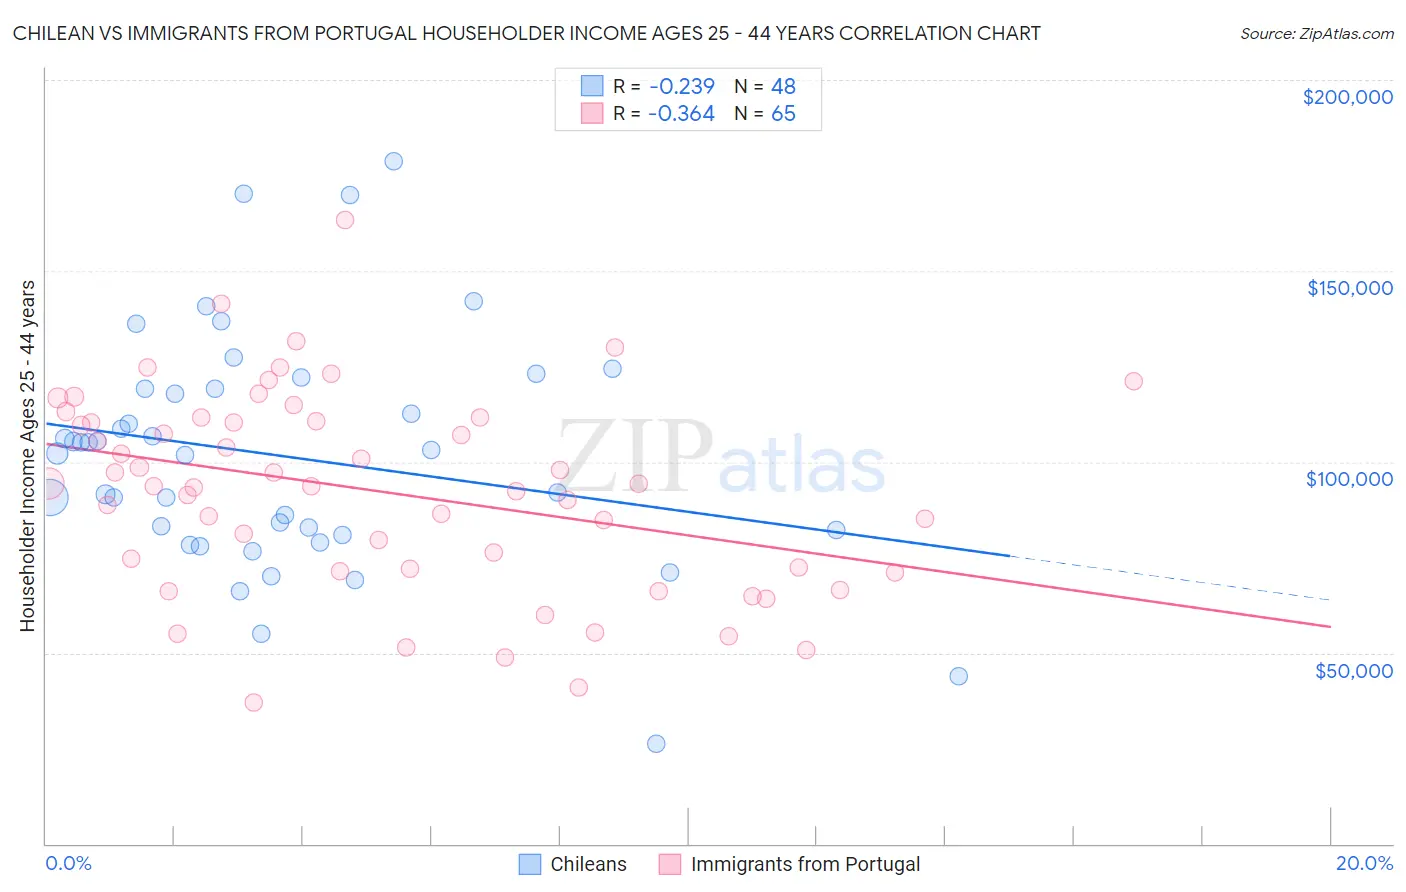 Chilean vs Immigrants from Portugal Householder Income Ages 25 - 44 years